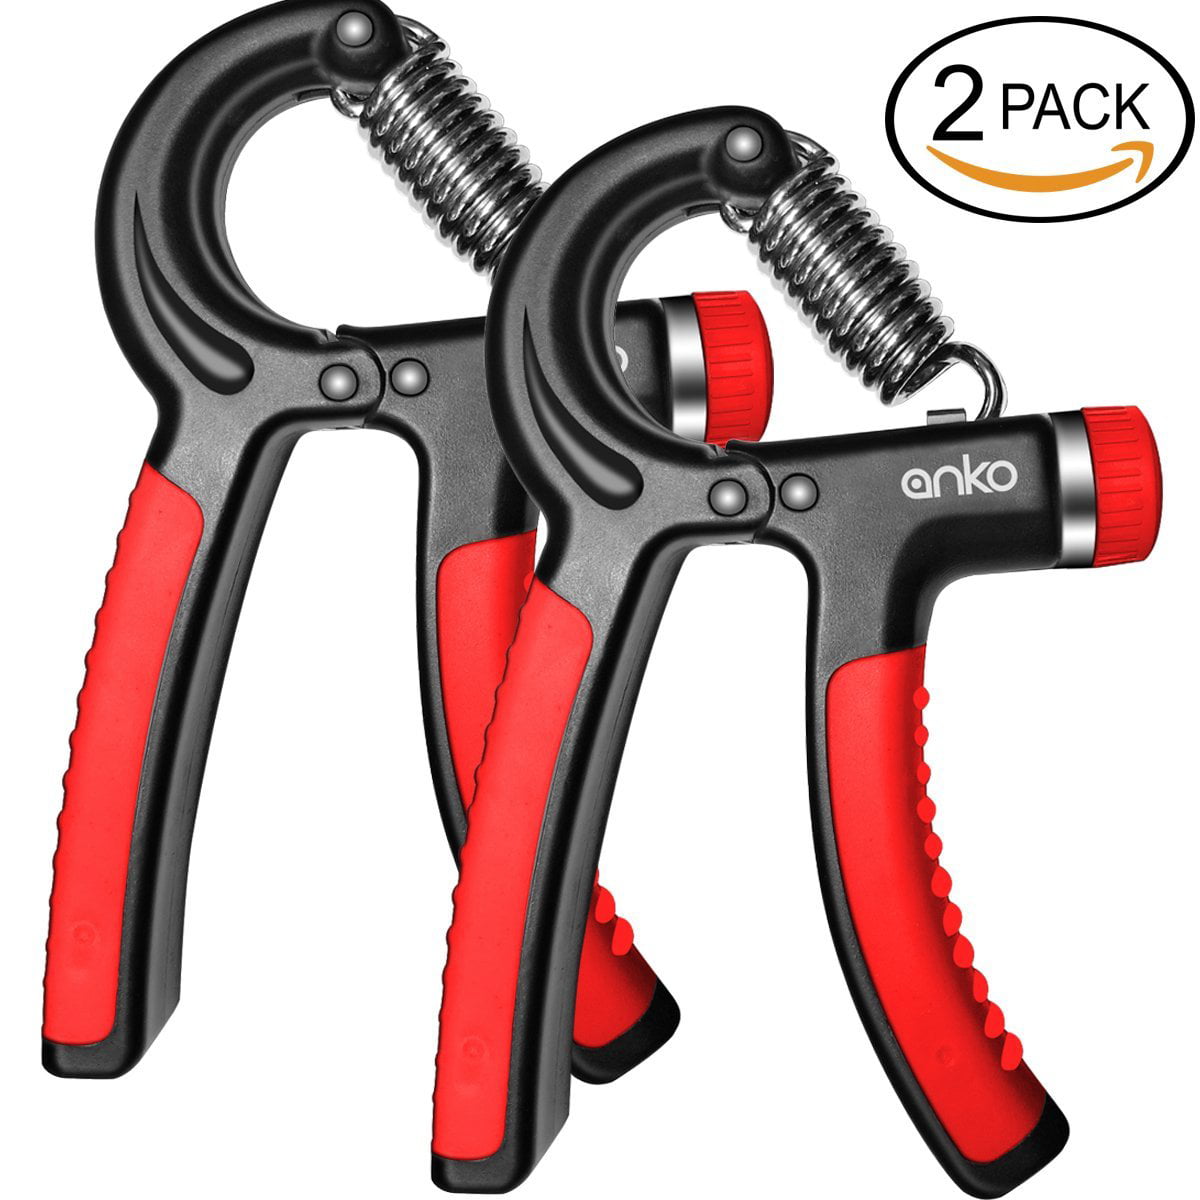 HK Hand Gripper Ball Fingers Exerciser Grip Strengthener Silicone Squee BE_ GT 